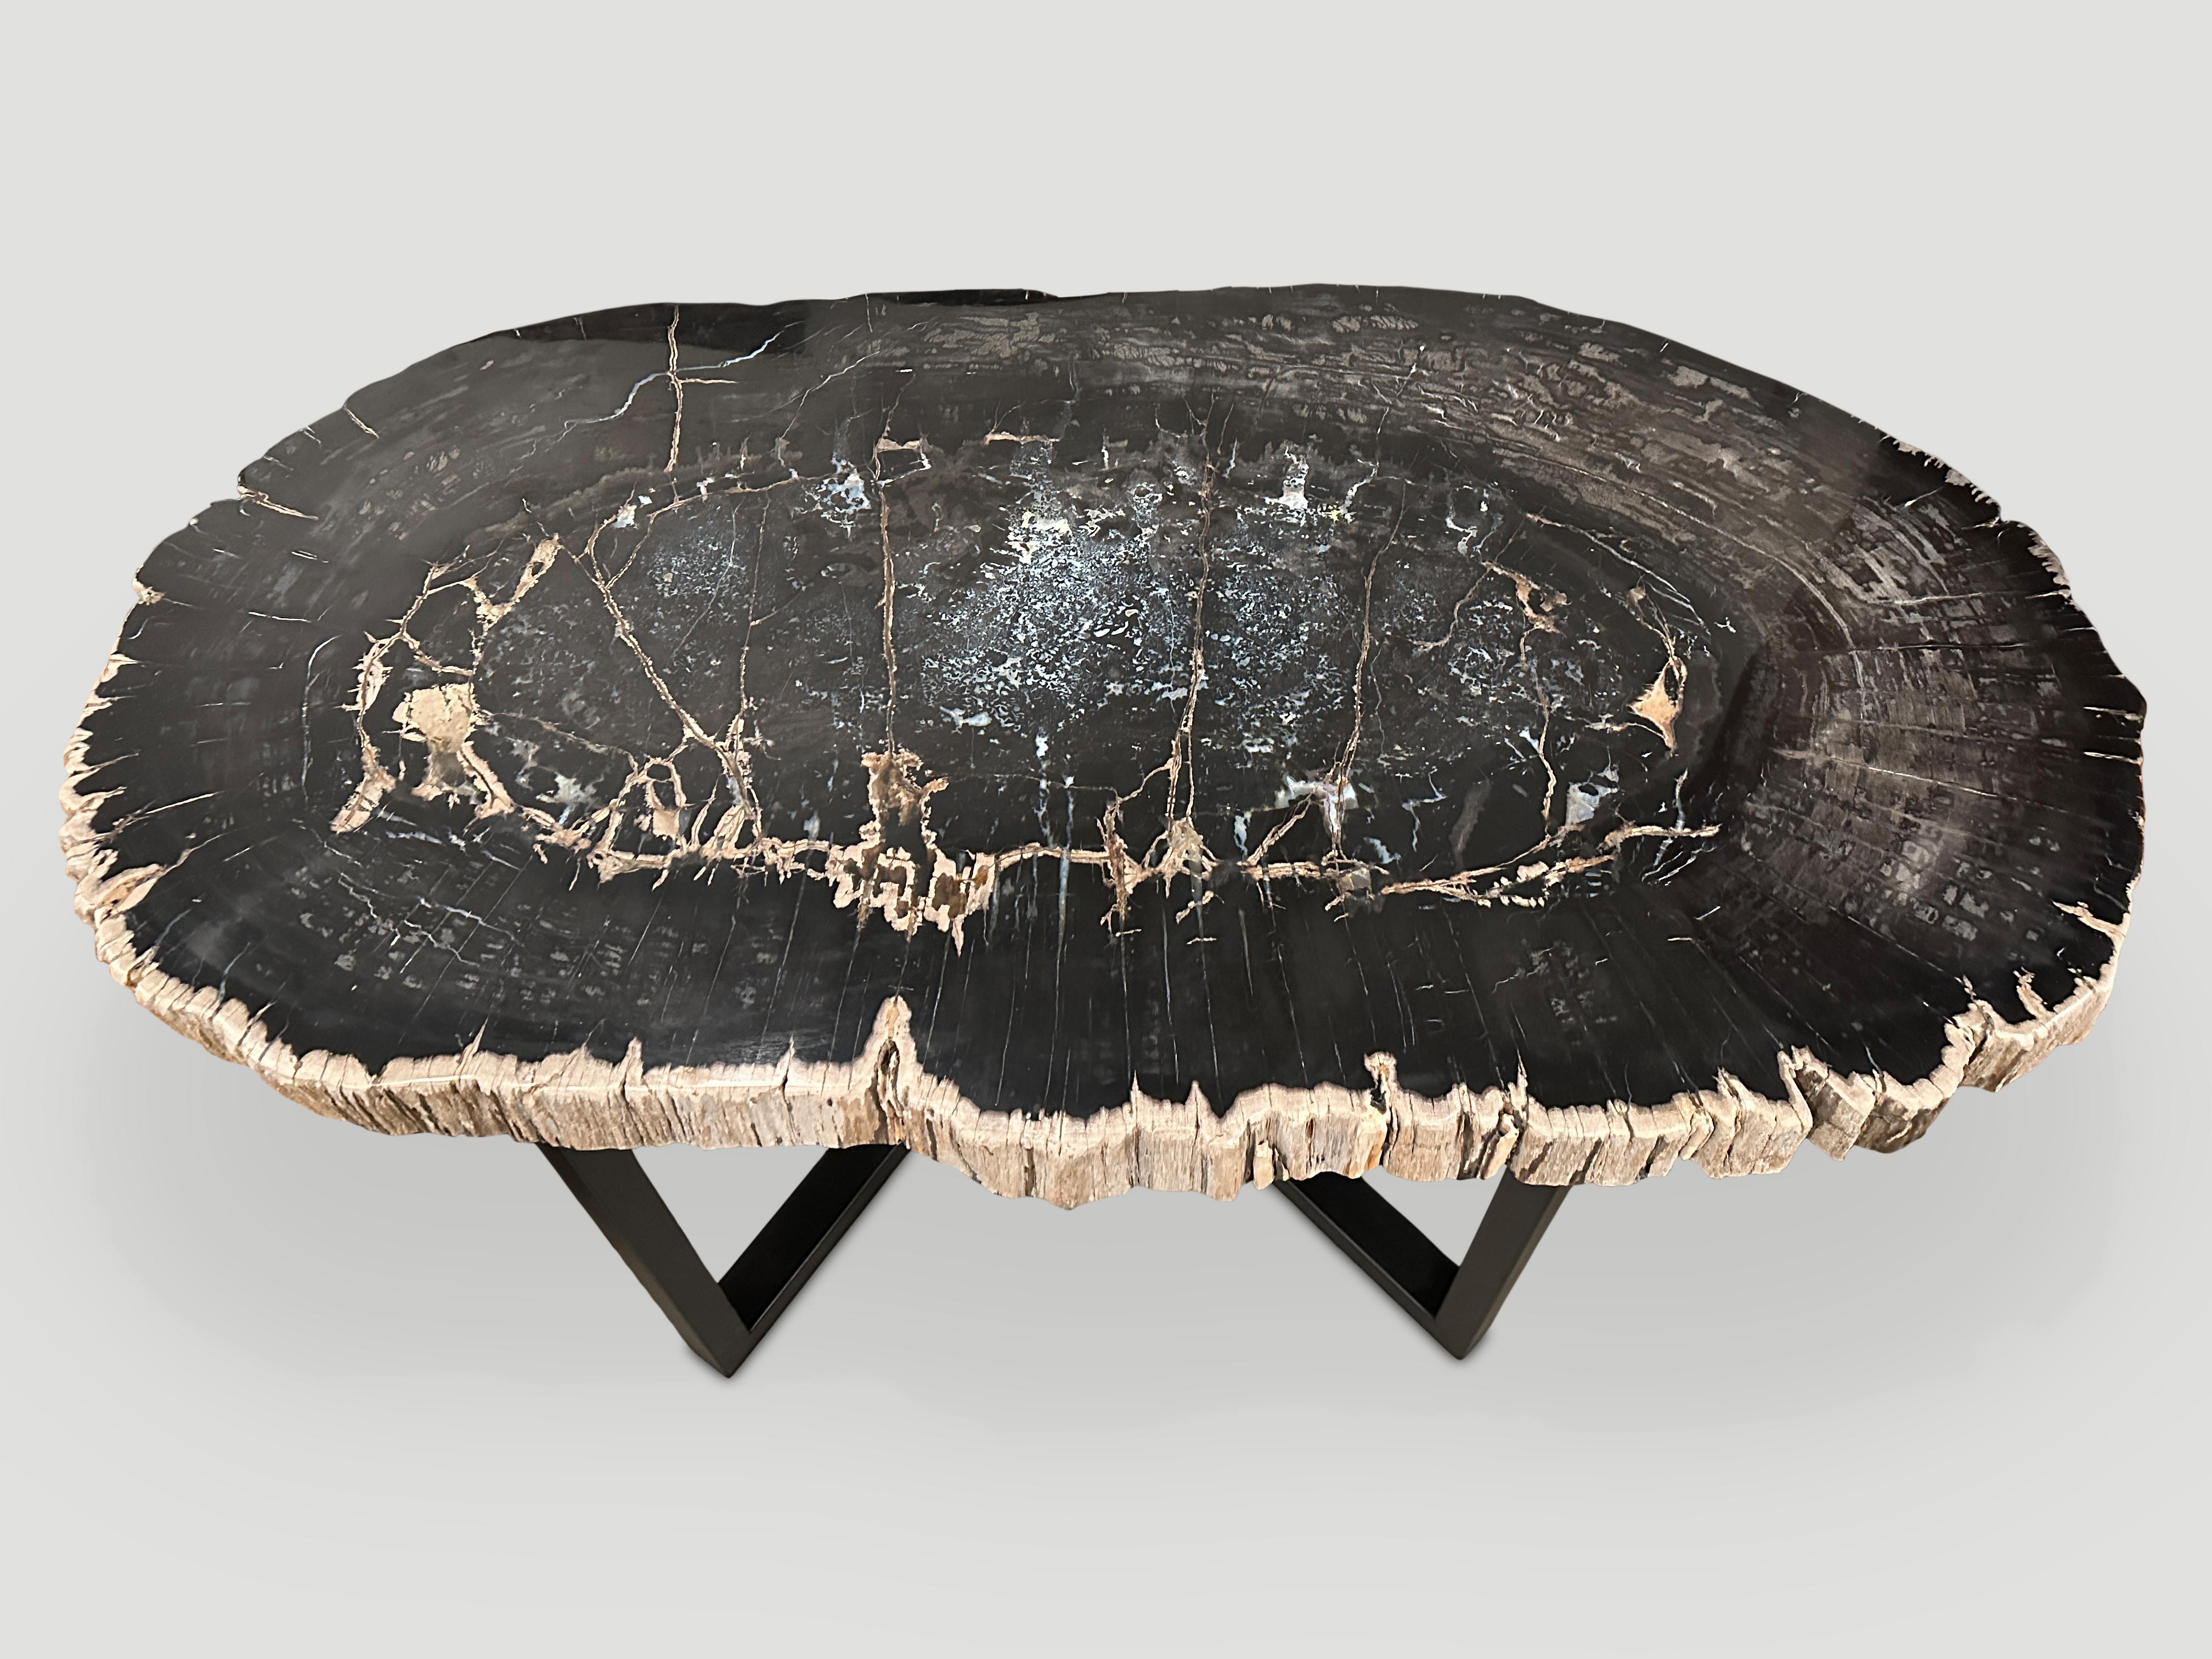 Contemporary Andrianna Shamaris Magnificent Large Petrified Wood Table For Sale